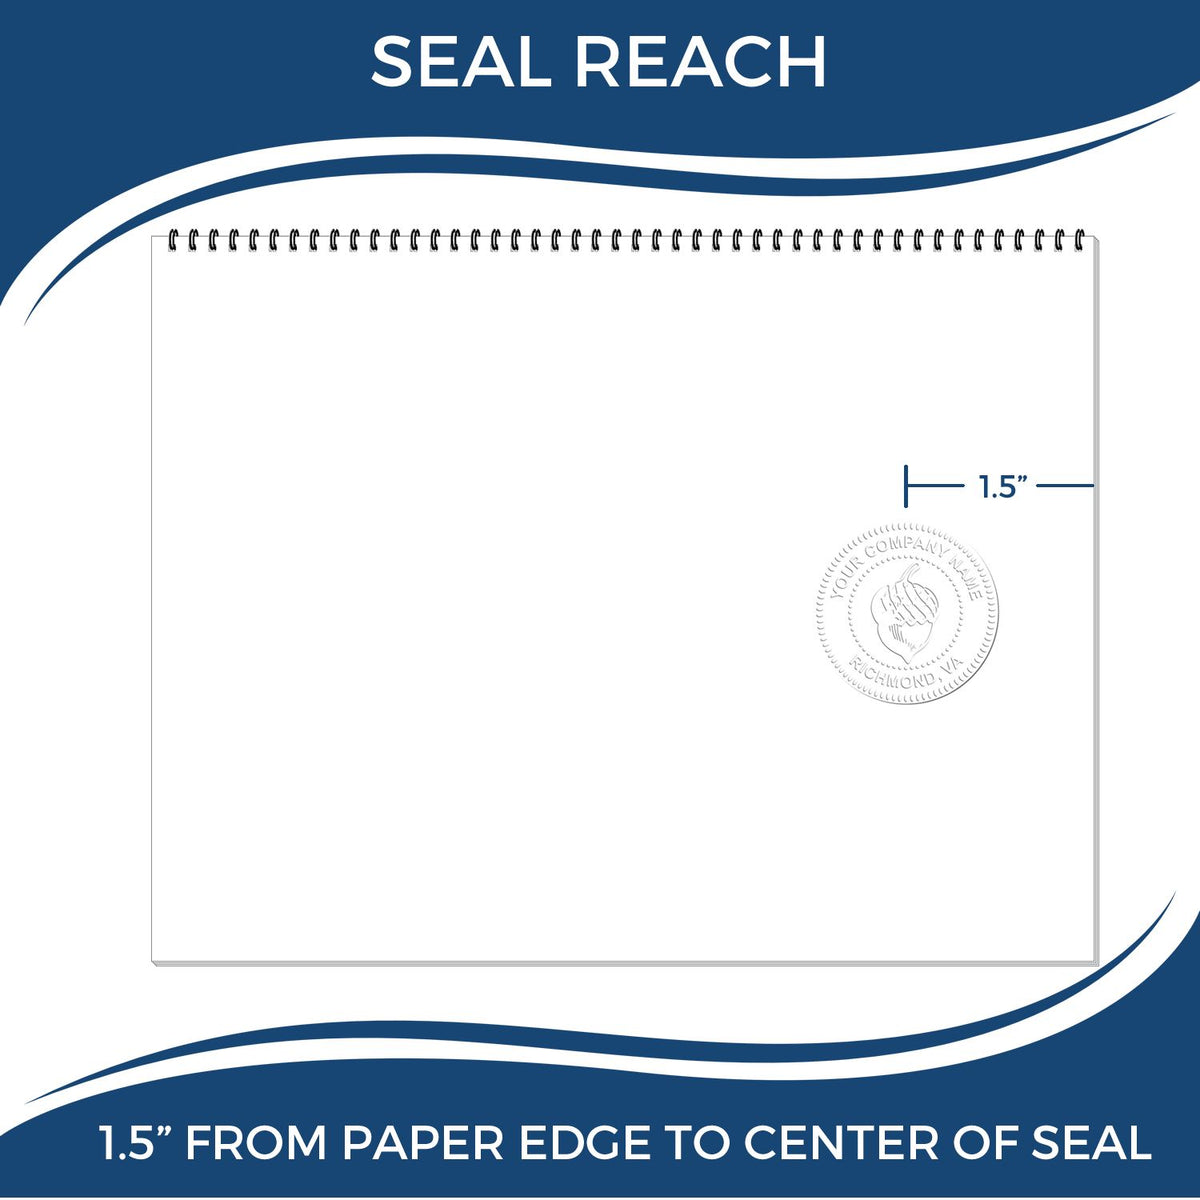 An infographic showing the seal reach which is represented by a ruler and a miniature seal image of the Handheld New Hampshire Professional Engineer Embosser